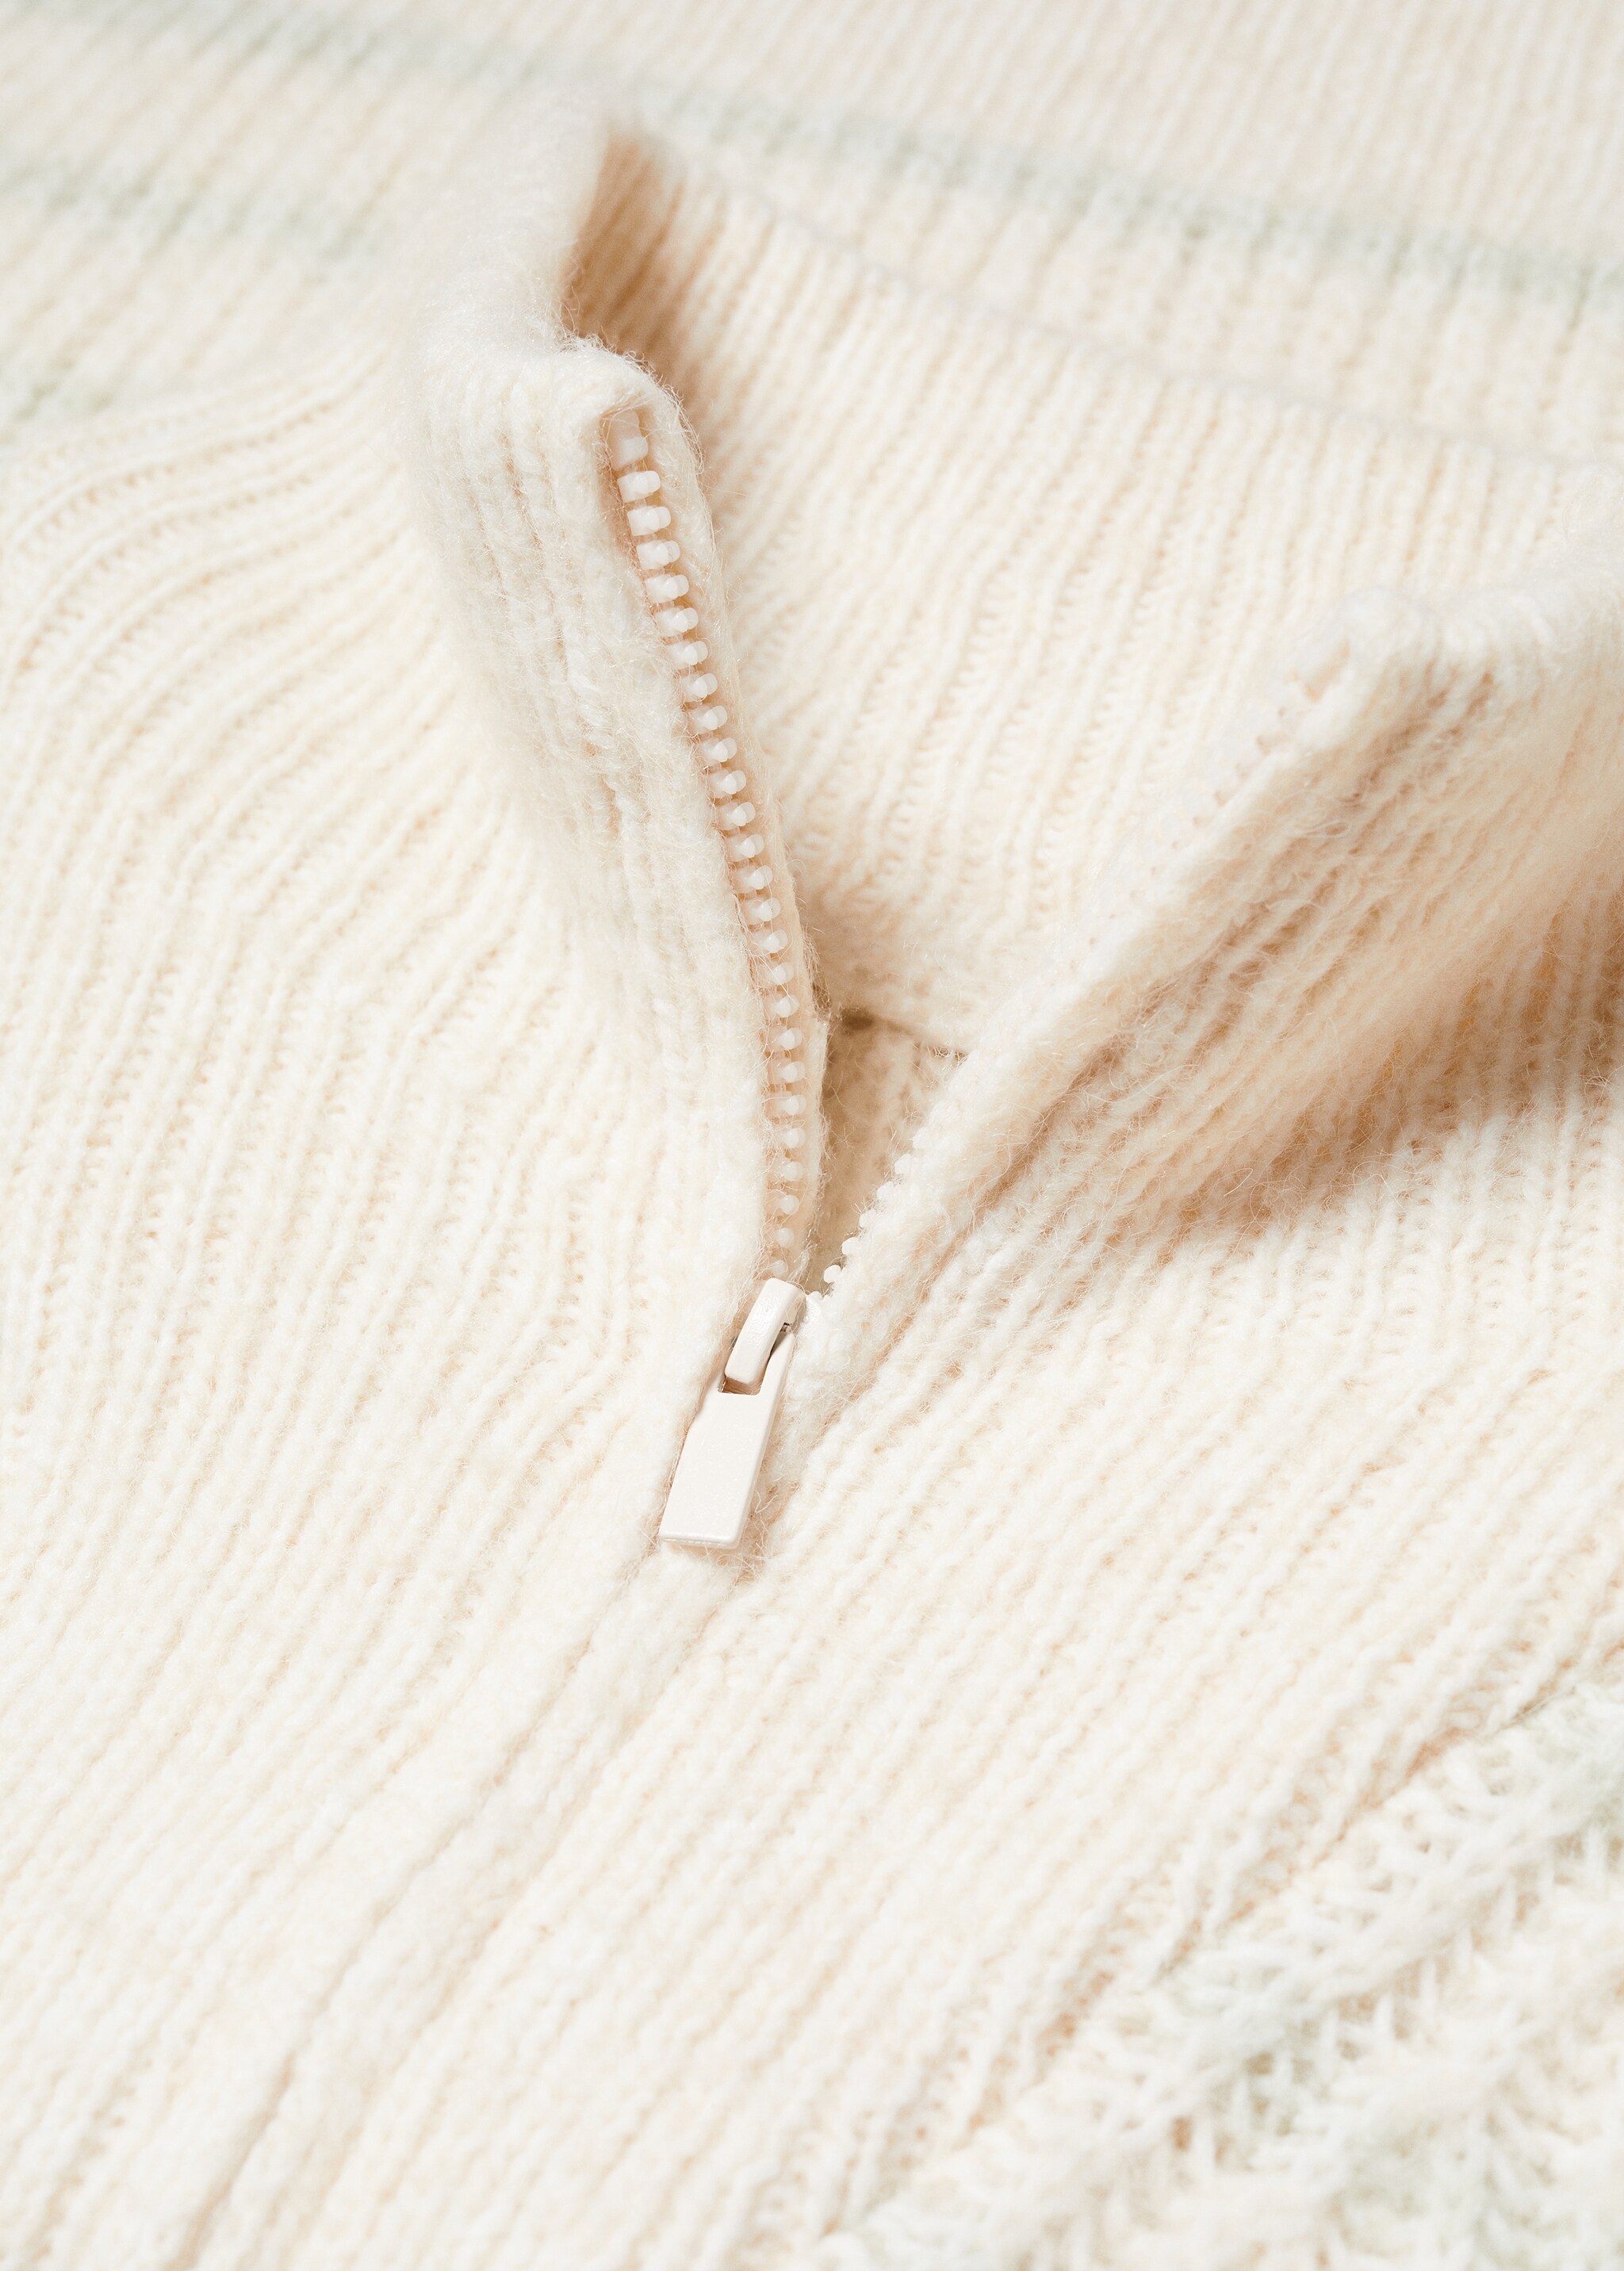 Striped sweater with zipper - Details of the article 8